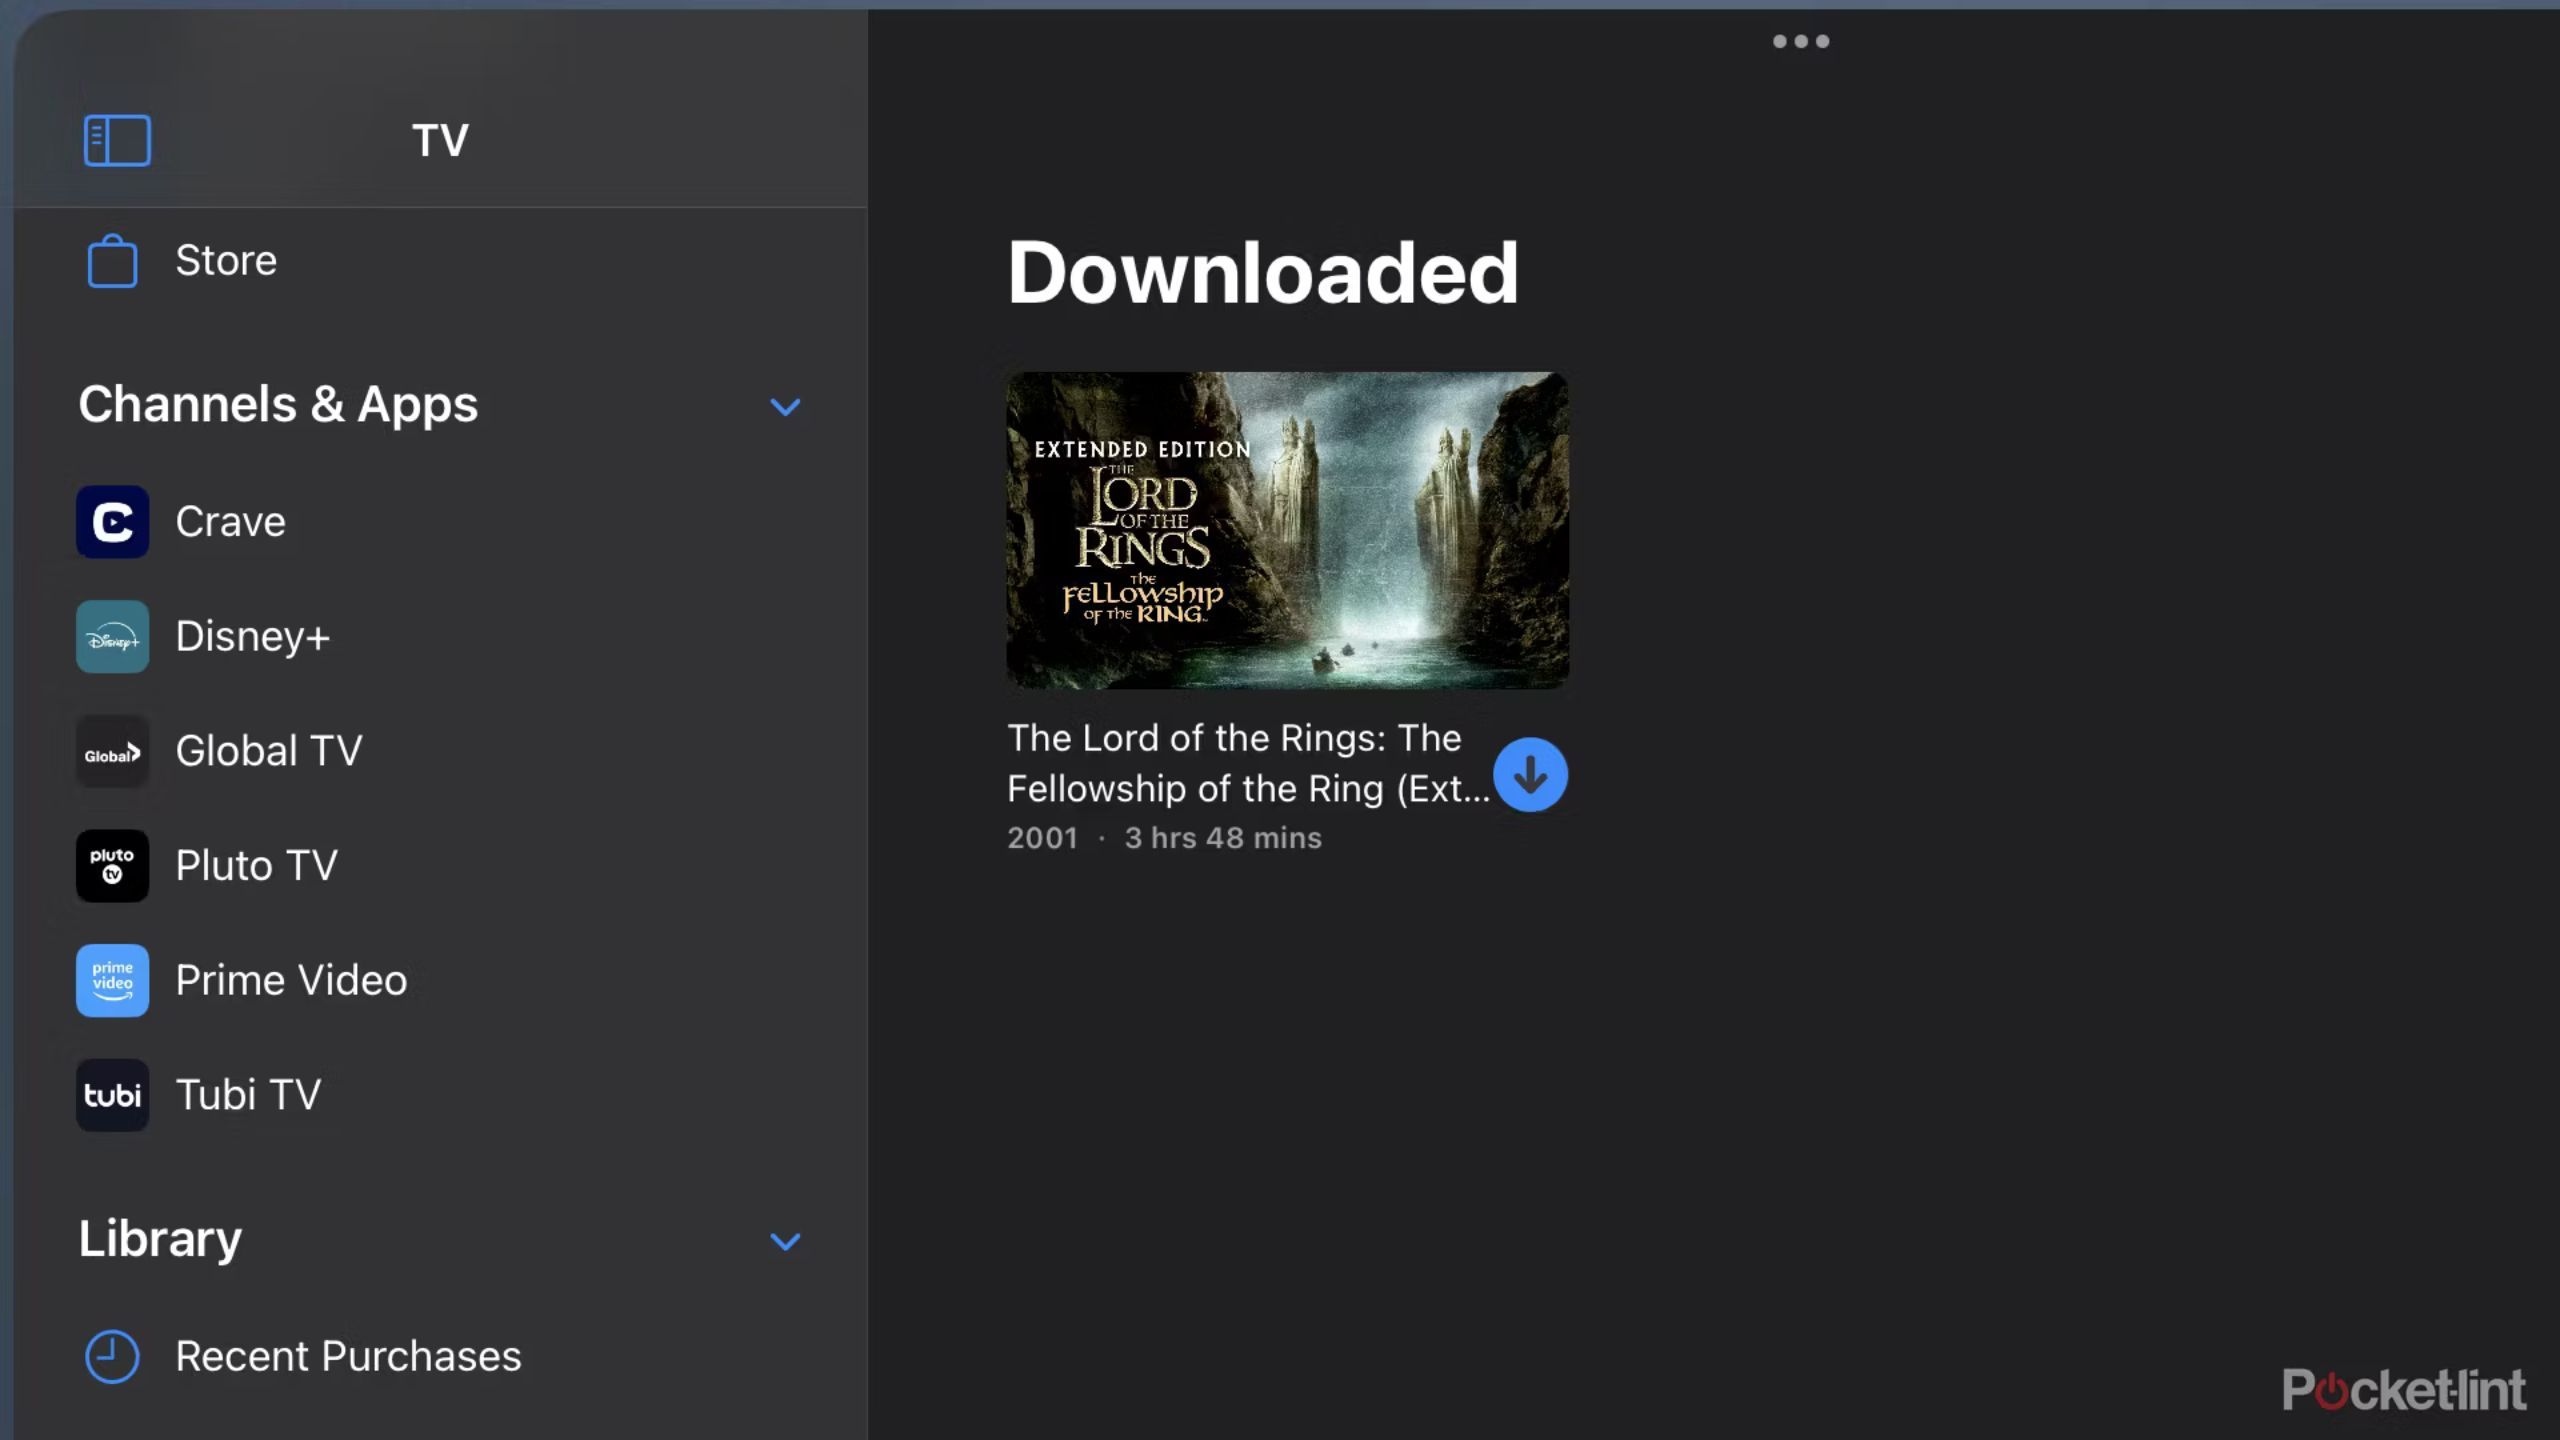 An image of Lord of the Rings: The Fellowship of the Ring (Extended Edition) downloaded in the Apple TV Plus library. 